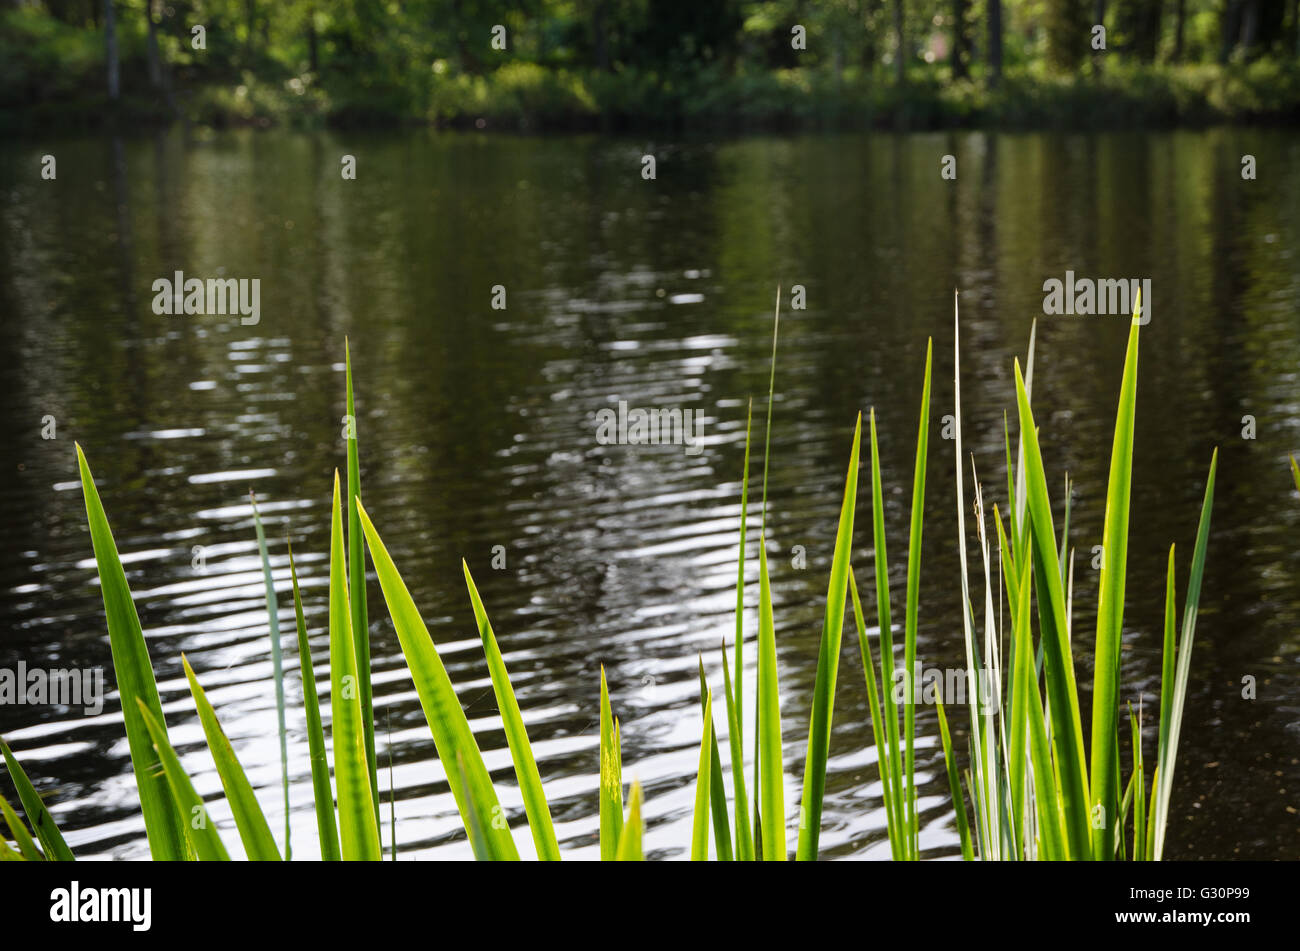 Green shiny leaves in backlight by a reflecting water surface Stock Photo